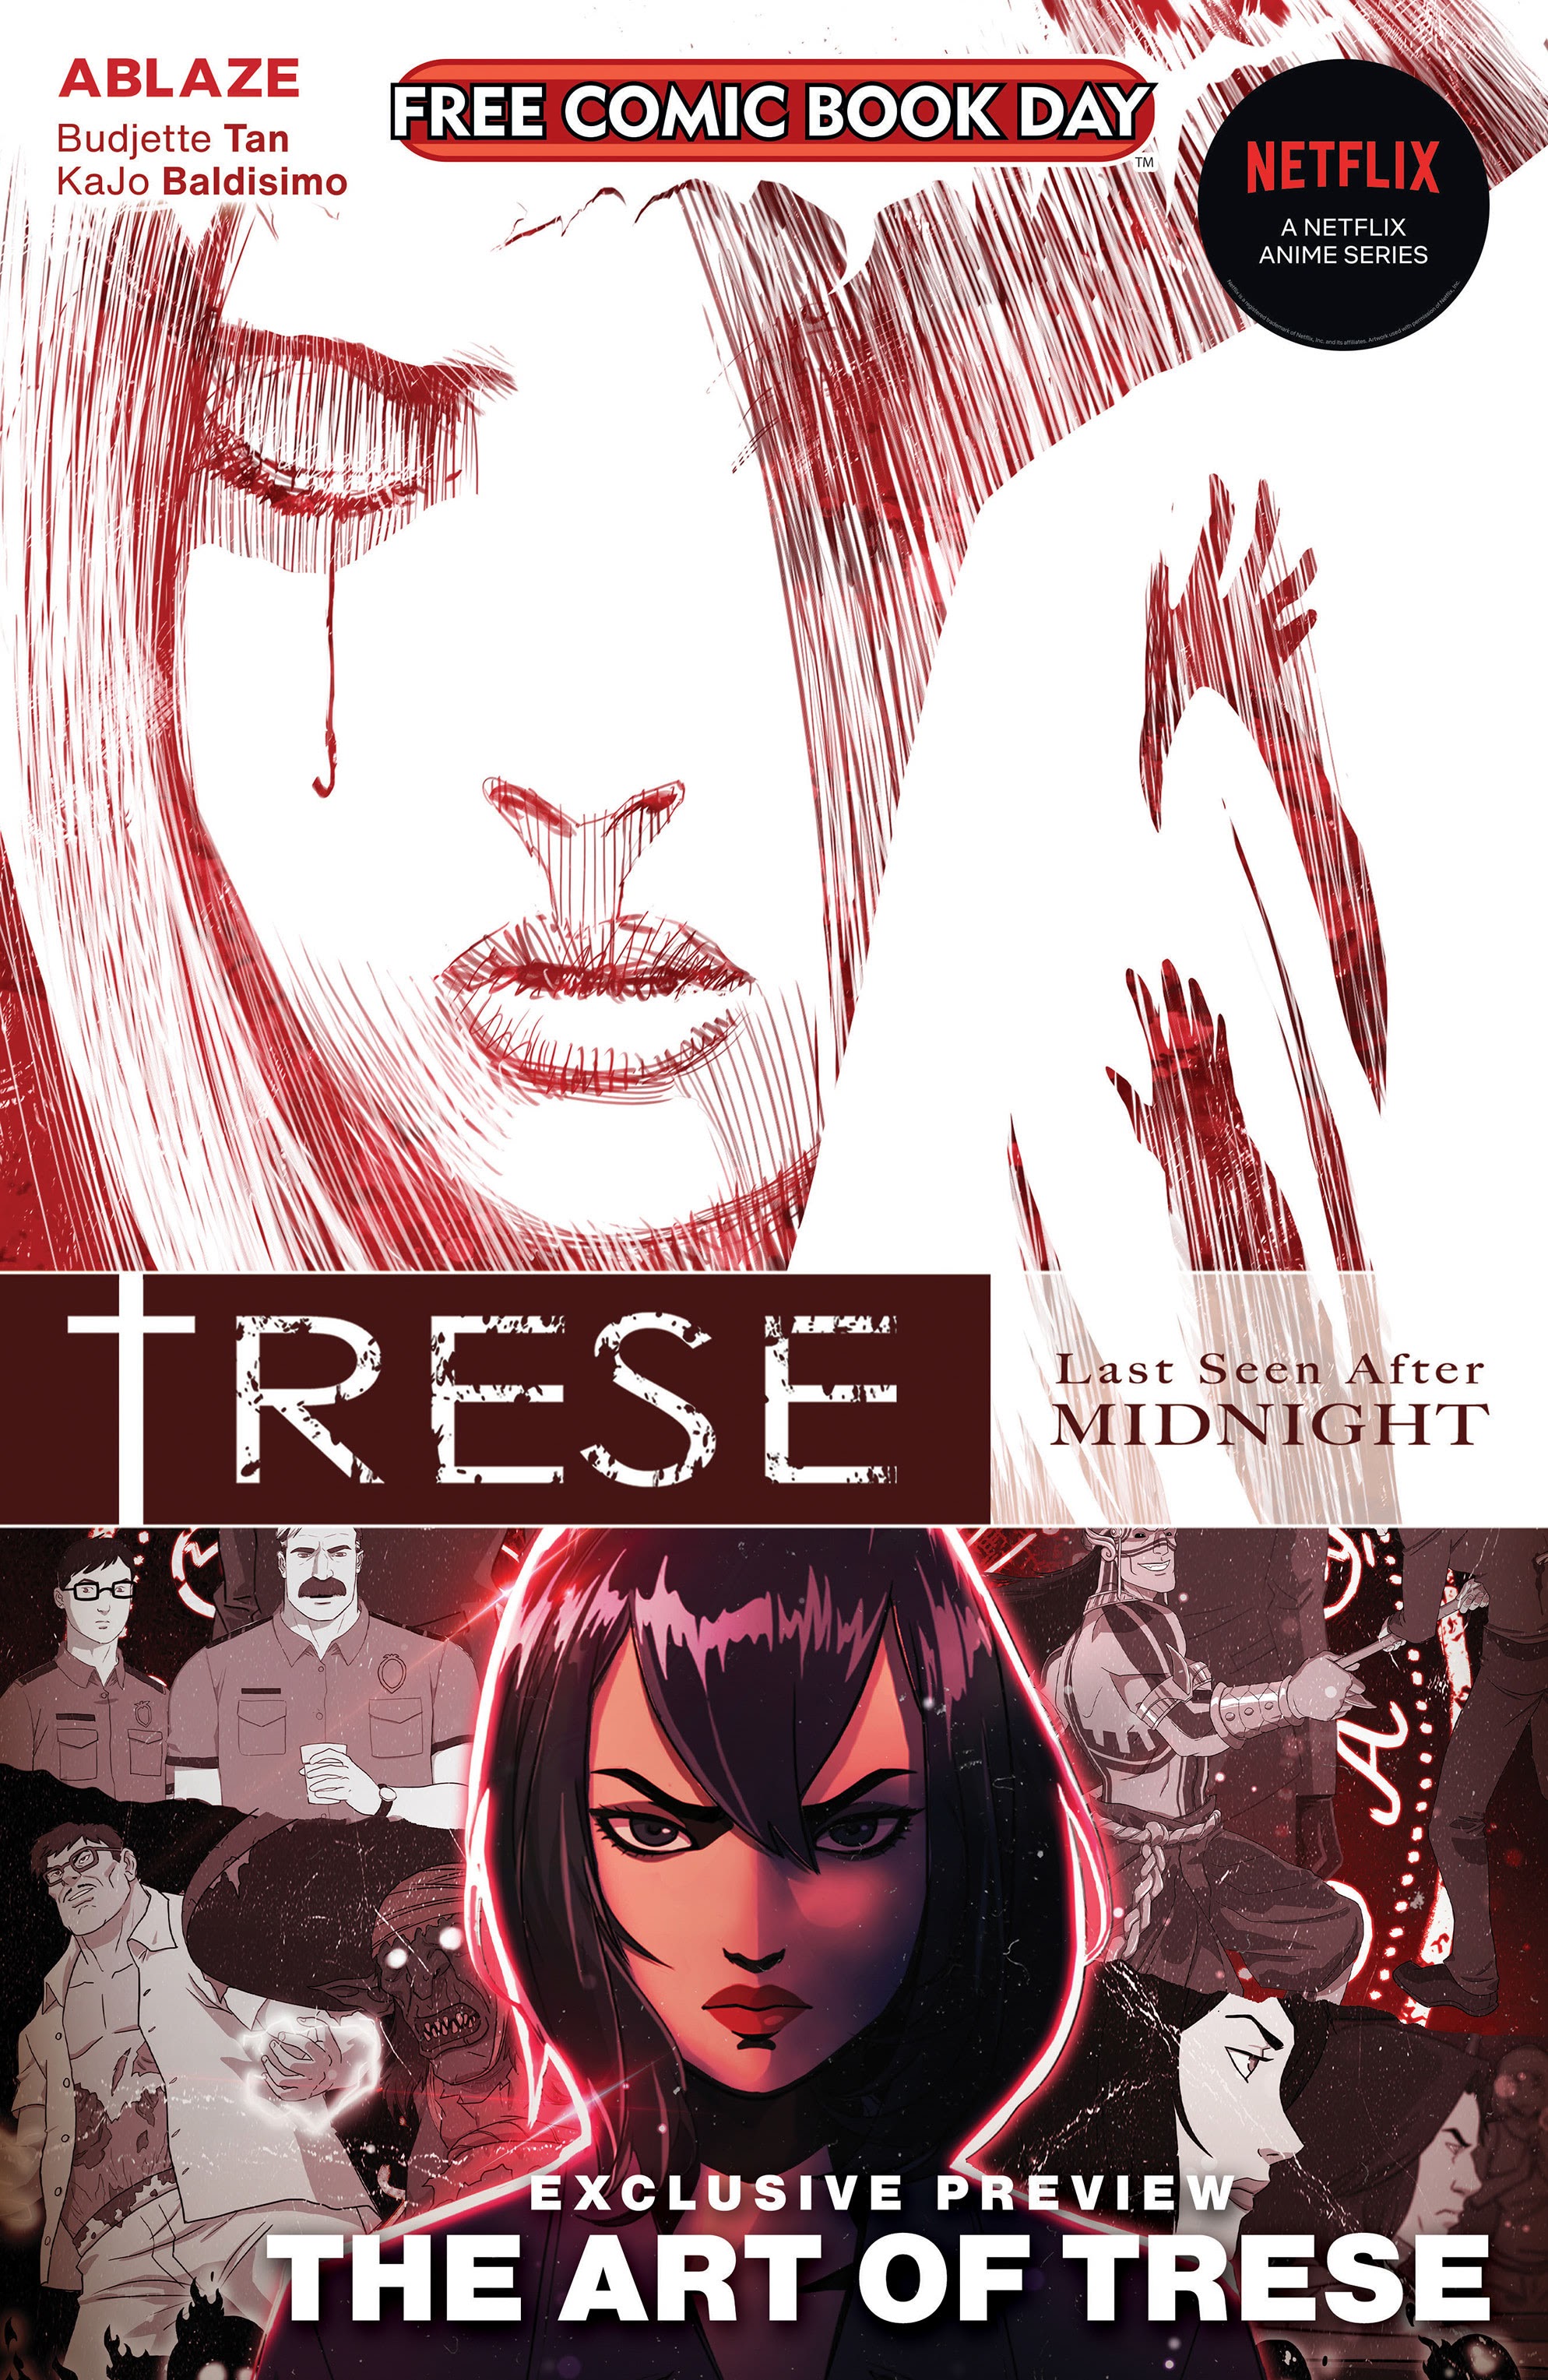 Read online Free Comic Book Day 2022 comic -  Issue # Trese - Last Seen After Midnight - 1